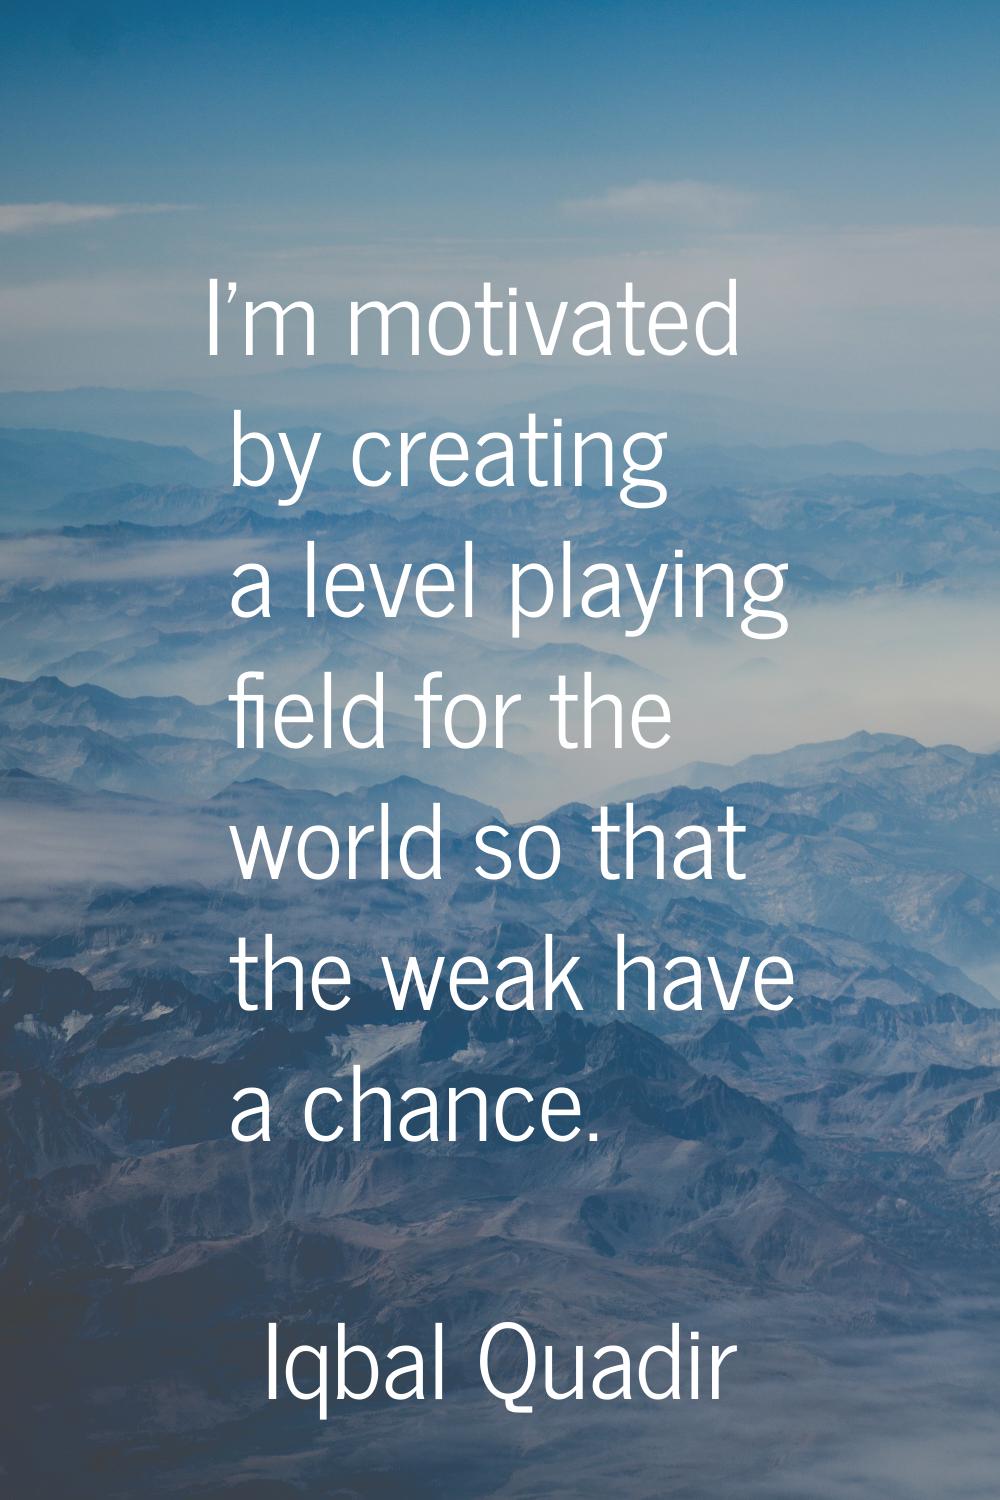 I'm motivated by creating a level playing field for the world so that the weak have a chance.